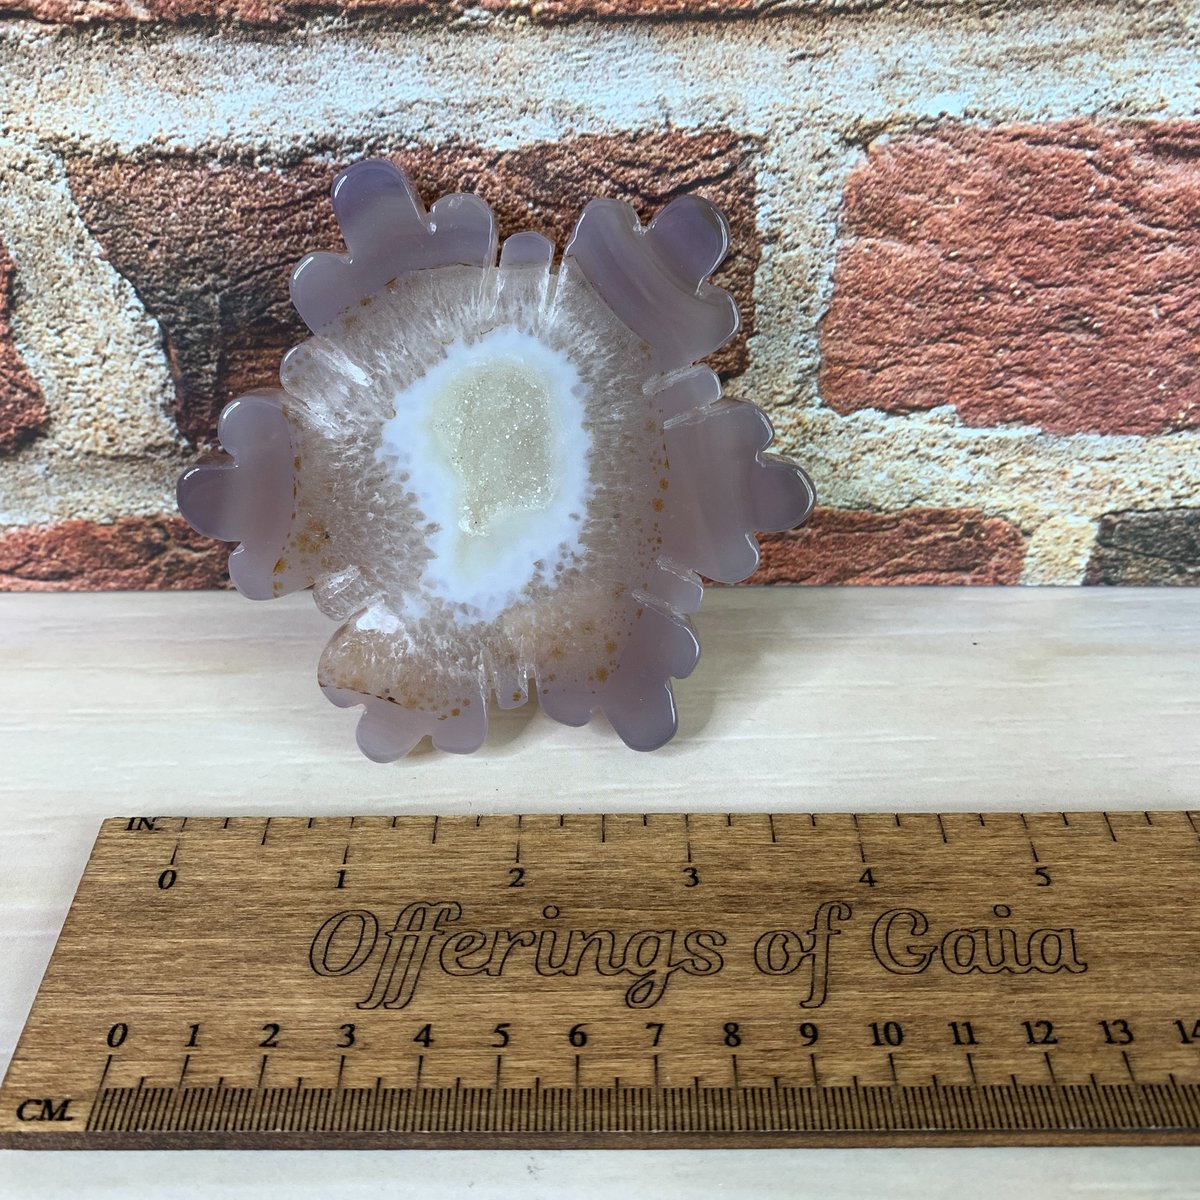 If you prefer a darker agate, this snowflake is perfect for you!
.
.
.
.
#crystaloftheday #crystaldecor #instacrystals #ilovecrystals #stonecollection #crystalstones #crystalstore #crystaljunkie #crystalseller #realstone #healingstone #metaphysicalshop #losbanos #merced #turlock